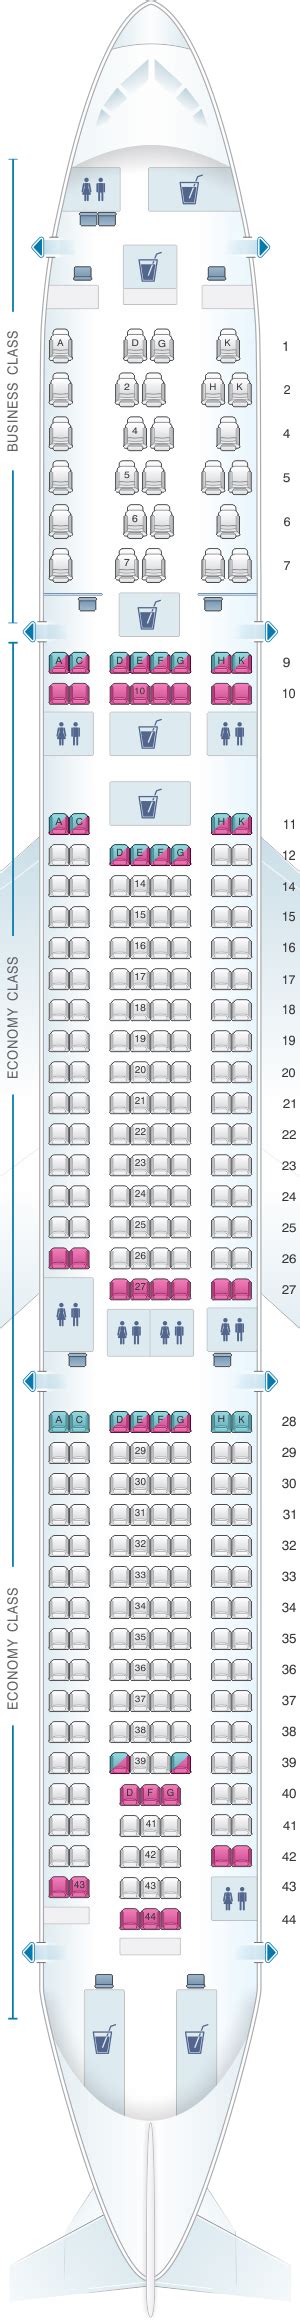 Malaysia Airlines A330 300 Seat Map Image To U